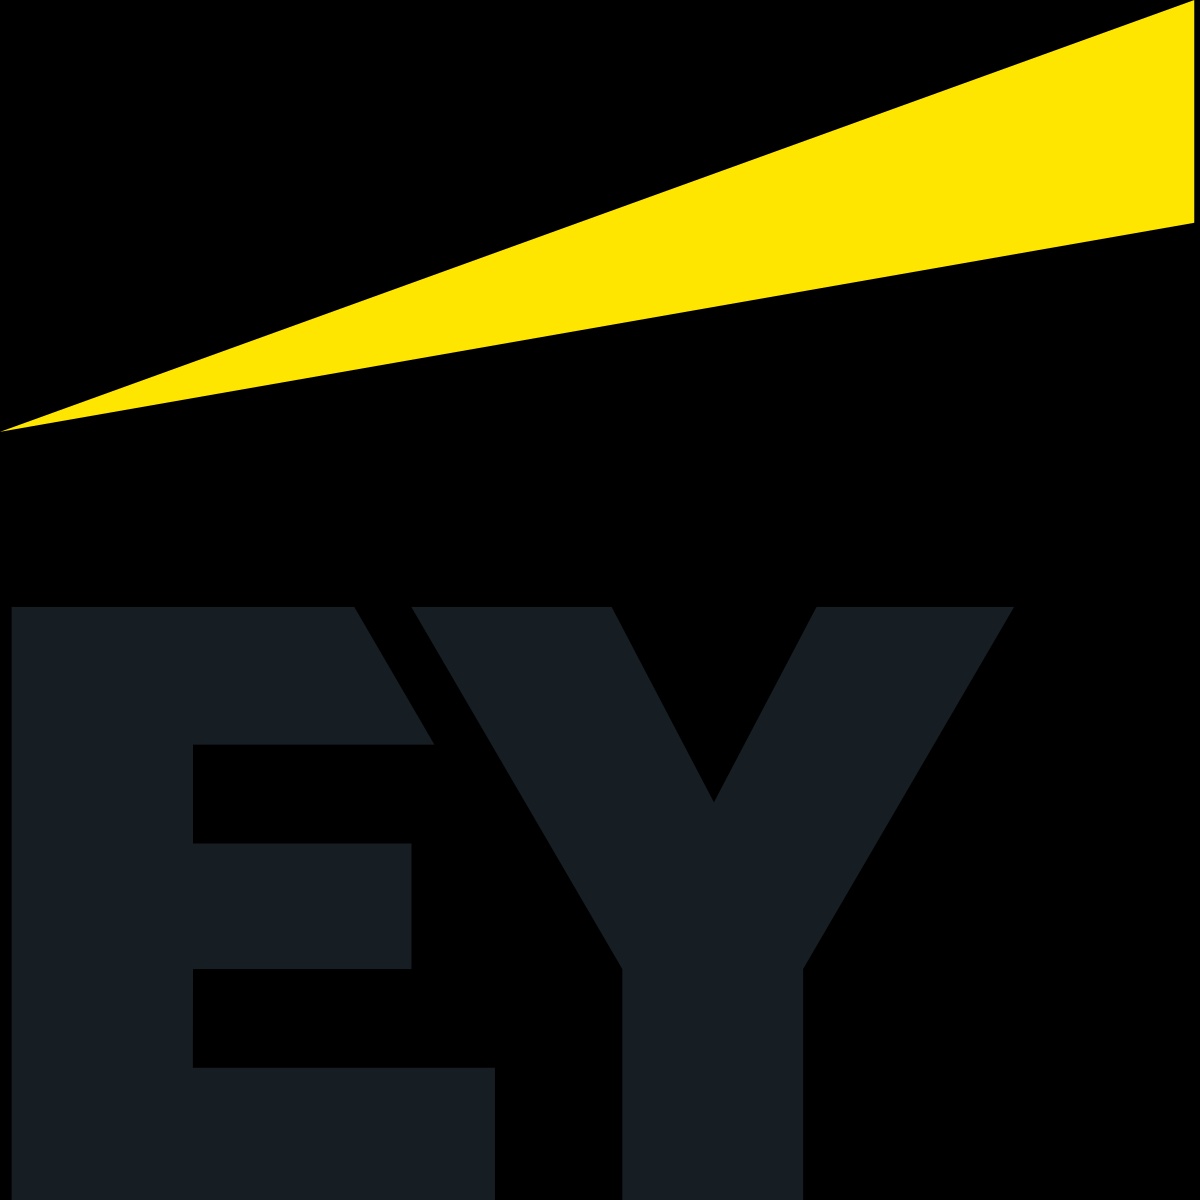 Ernst and Young logo